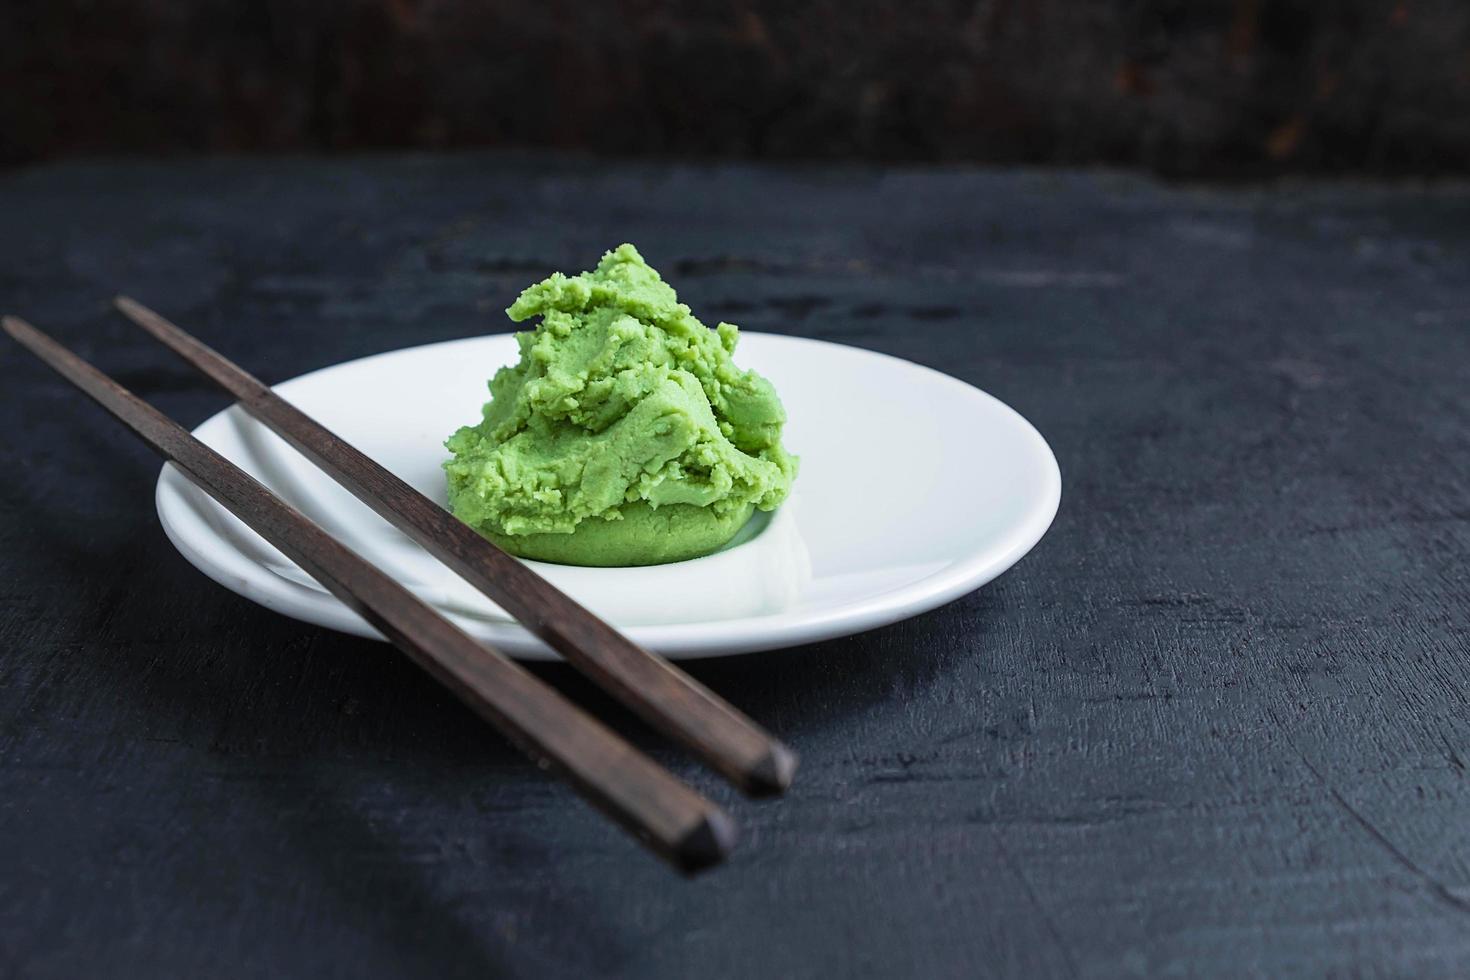 Wasabi on white plate with pair of chopsticks on black table background photo